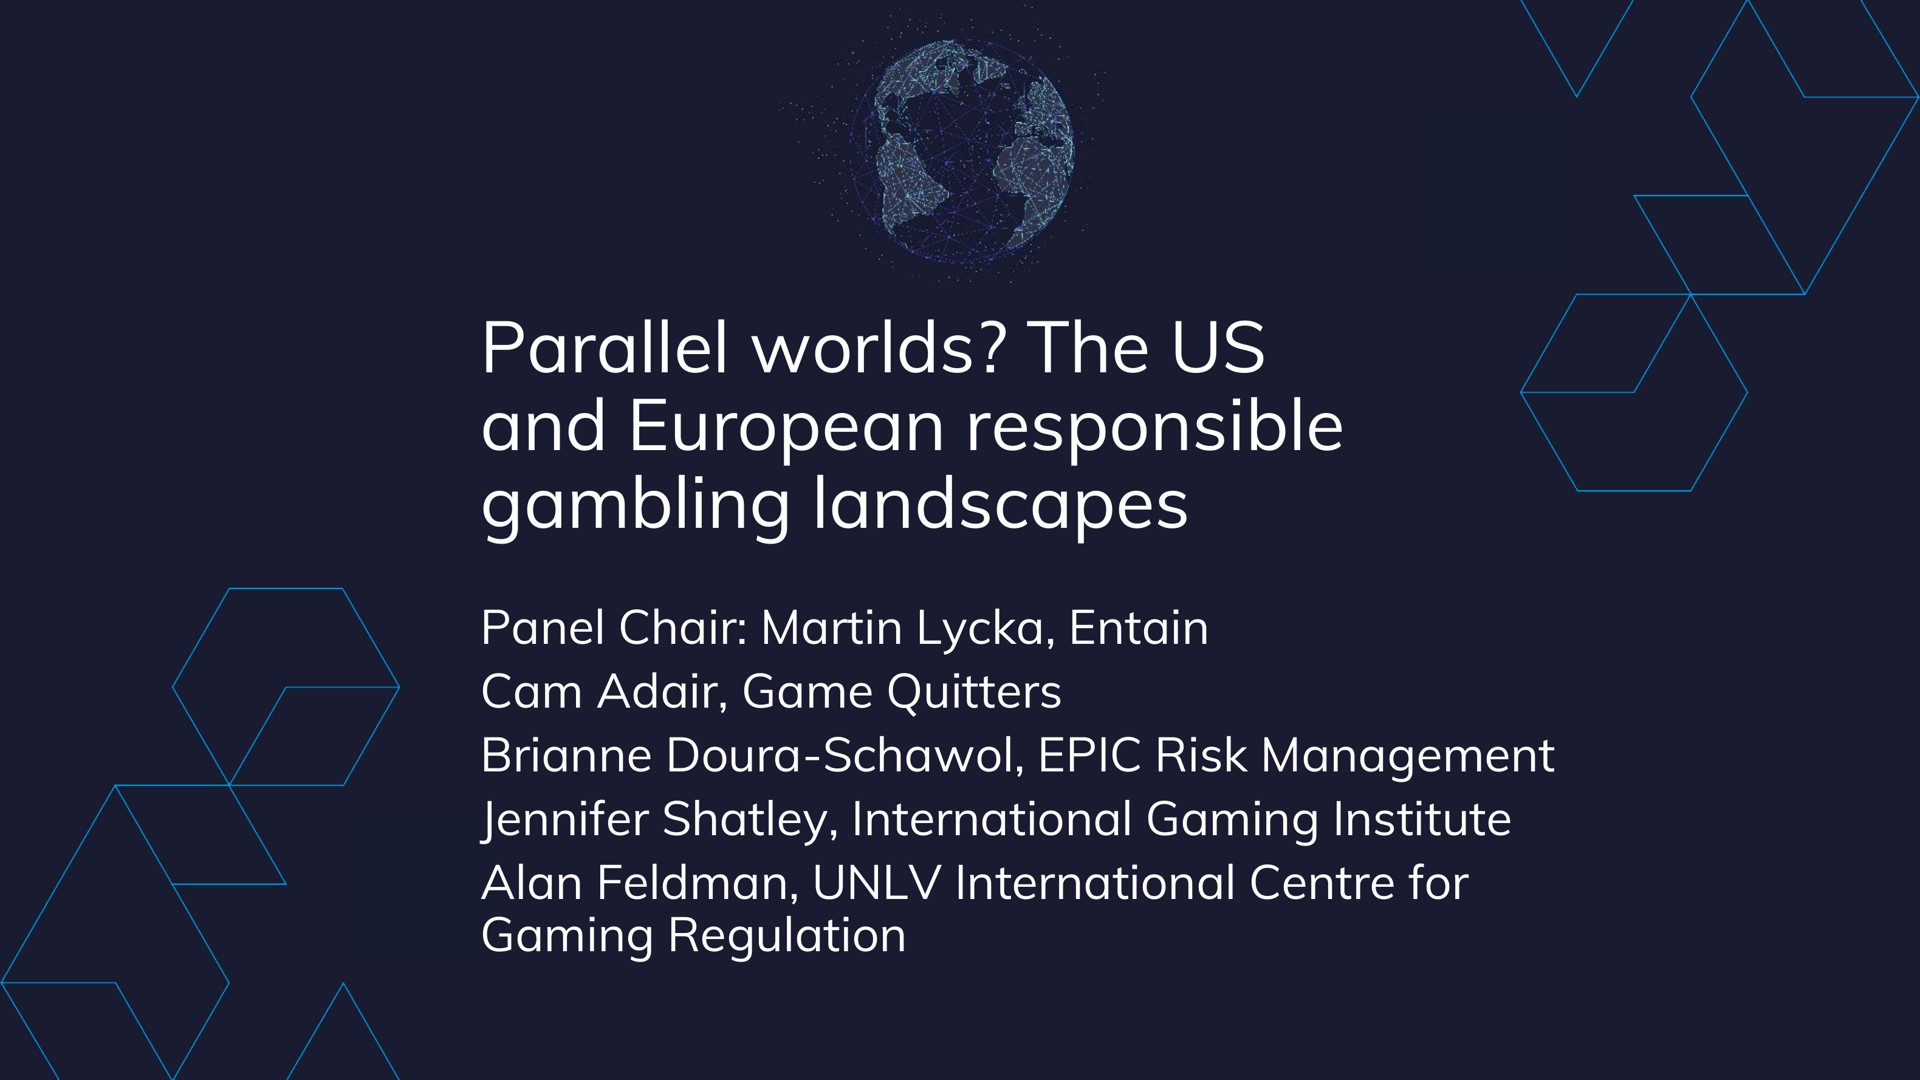 parallel worlds the us and responsible gambling landscapes | Entain Group